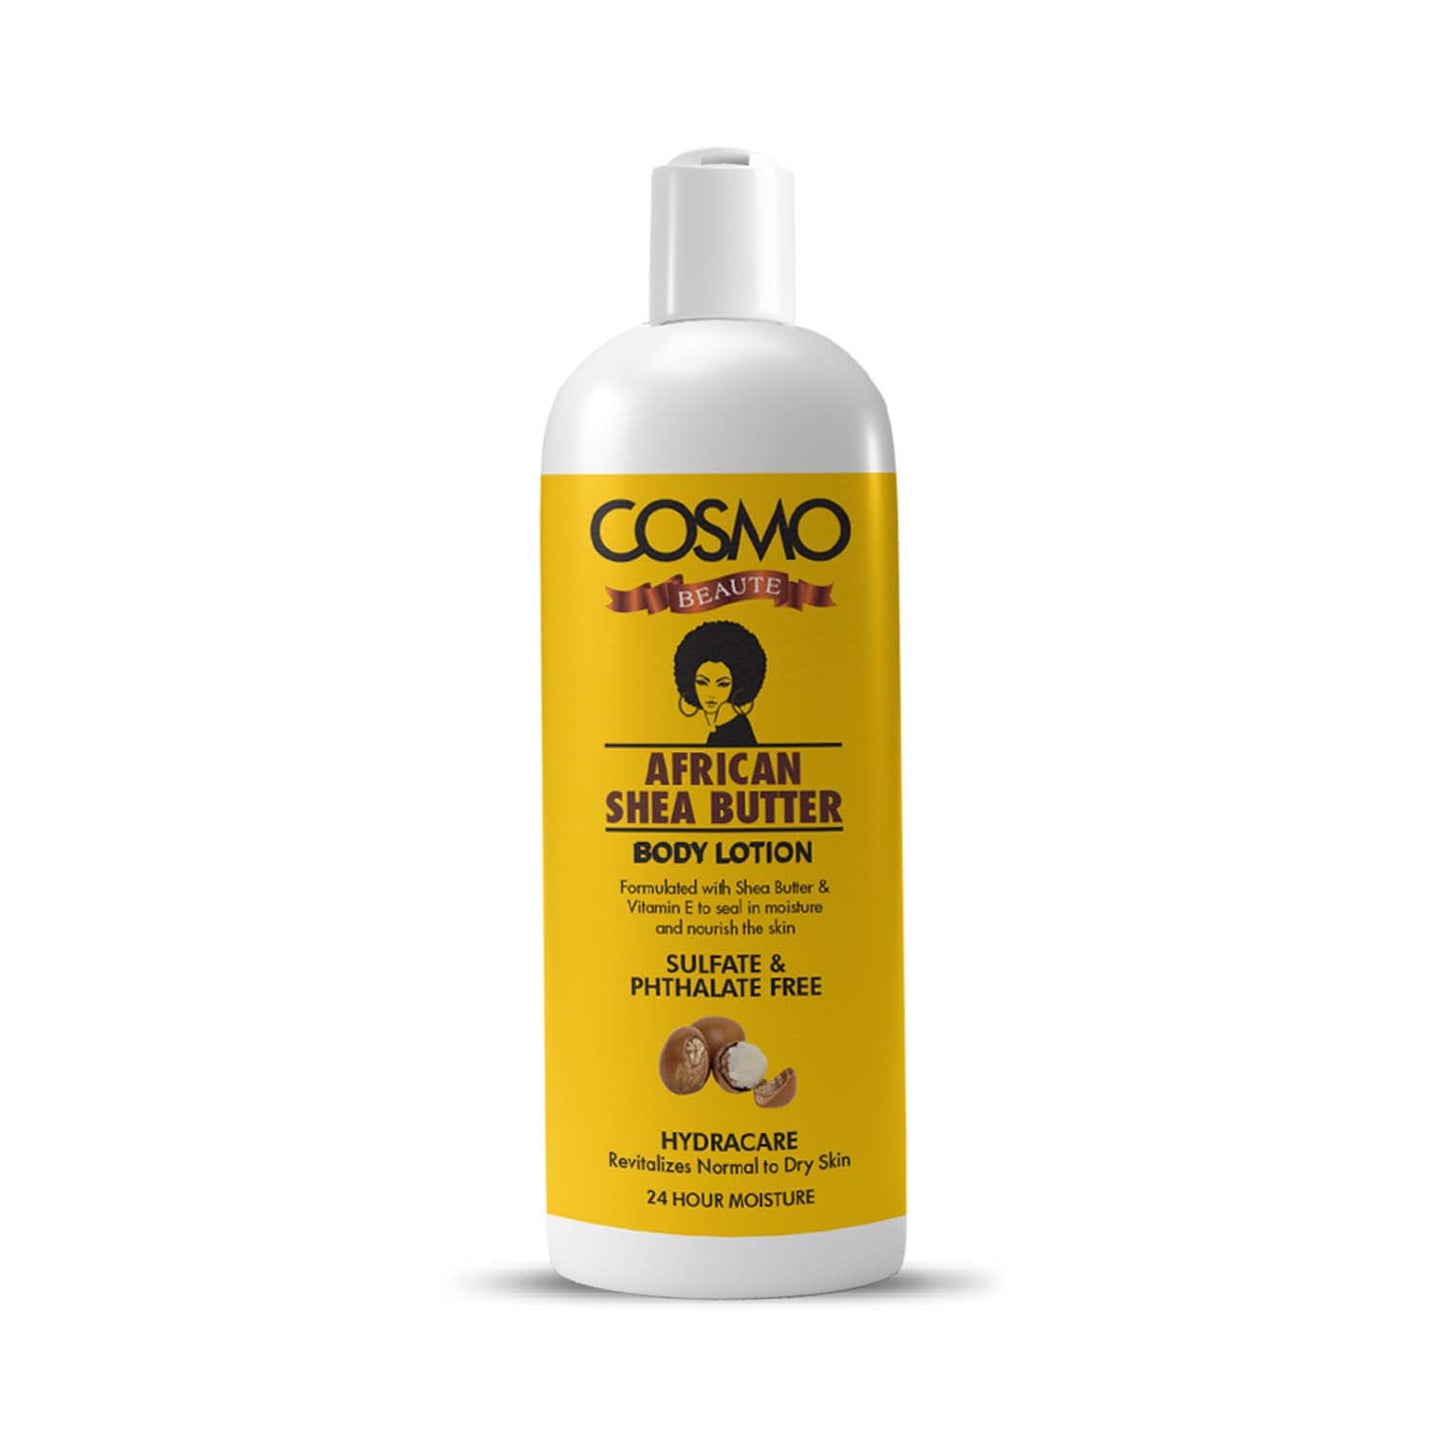 COSMO AFRICAN SHEA BUTTER - BODY LOTION